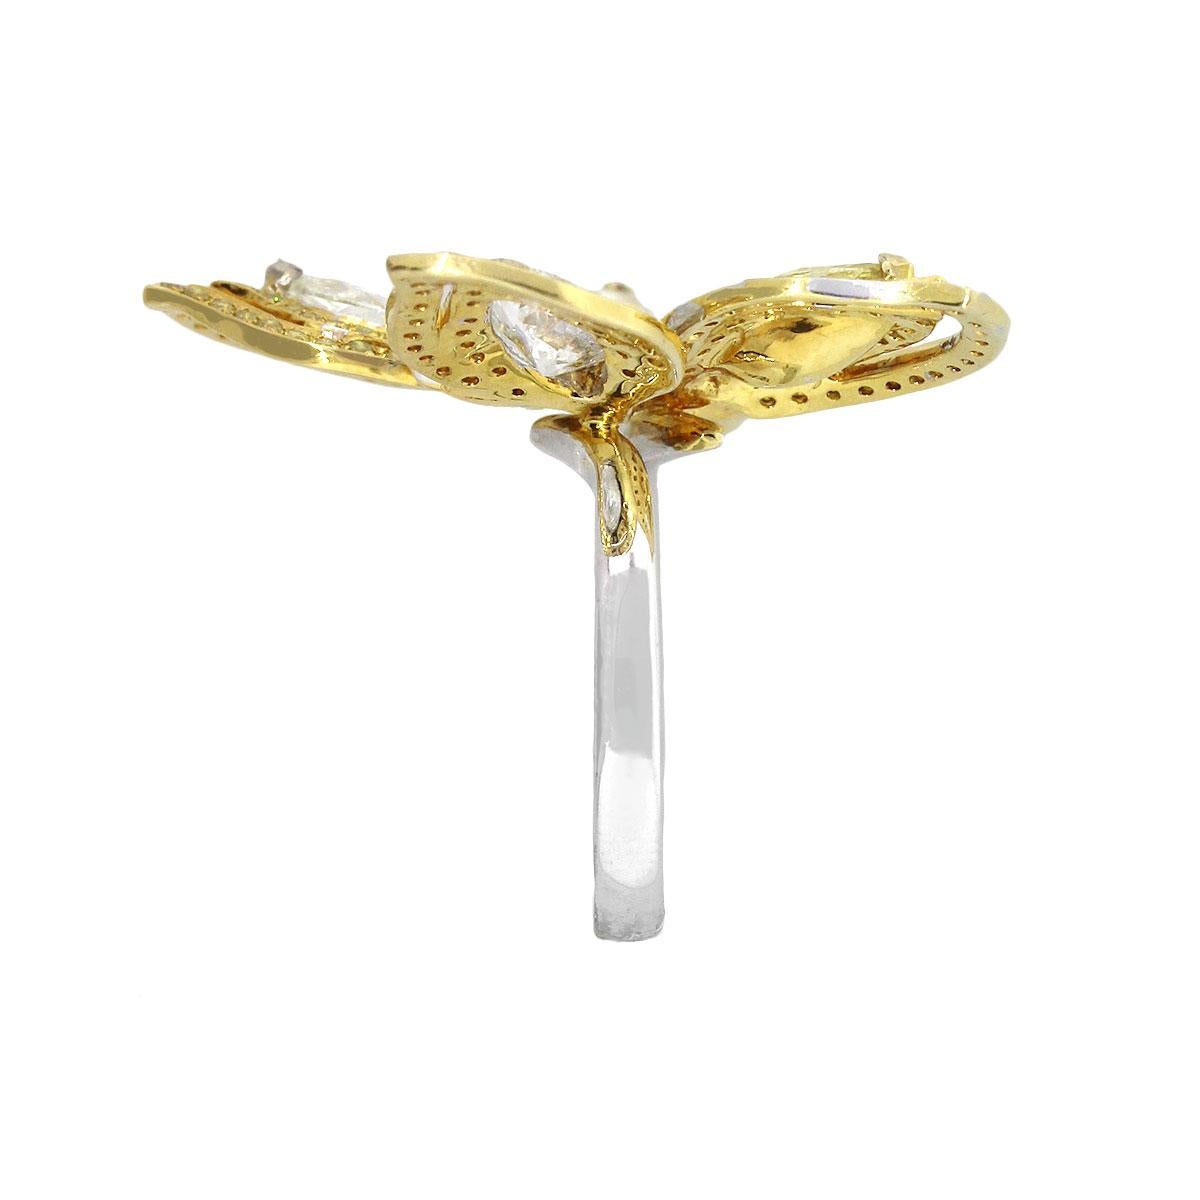 Material: 18k White Gold and Yellow Gold
Diamond Details: 
Approx. 4.19ctw of Marquise & Heart shaped diamonds. Diamonds are fancy yellow and G/H in color, SI in clarity.
Approx. 1.11ctw of Round Brilliant diamonds. Diamonds are fancy yellow in